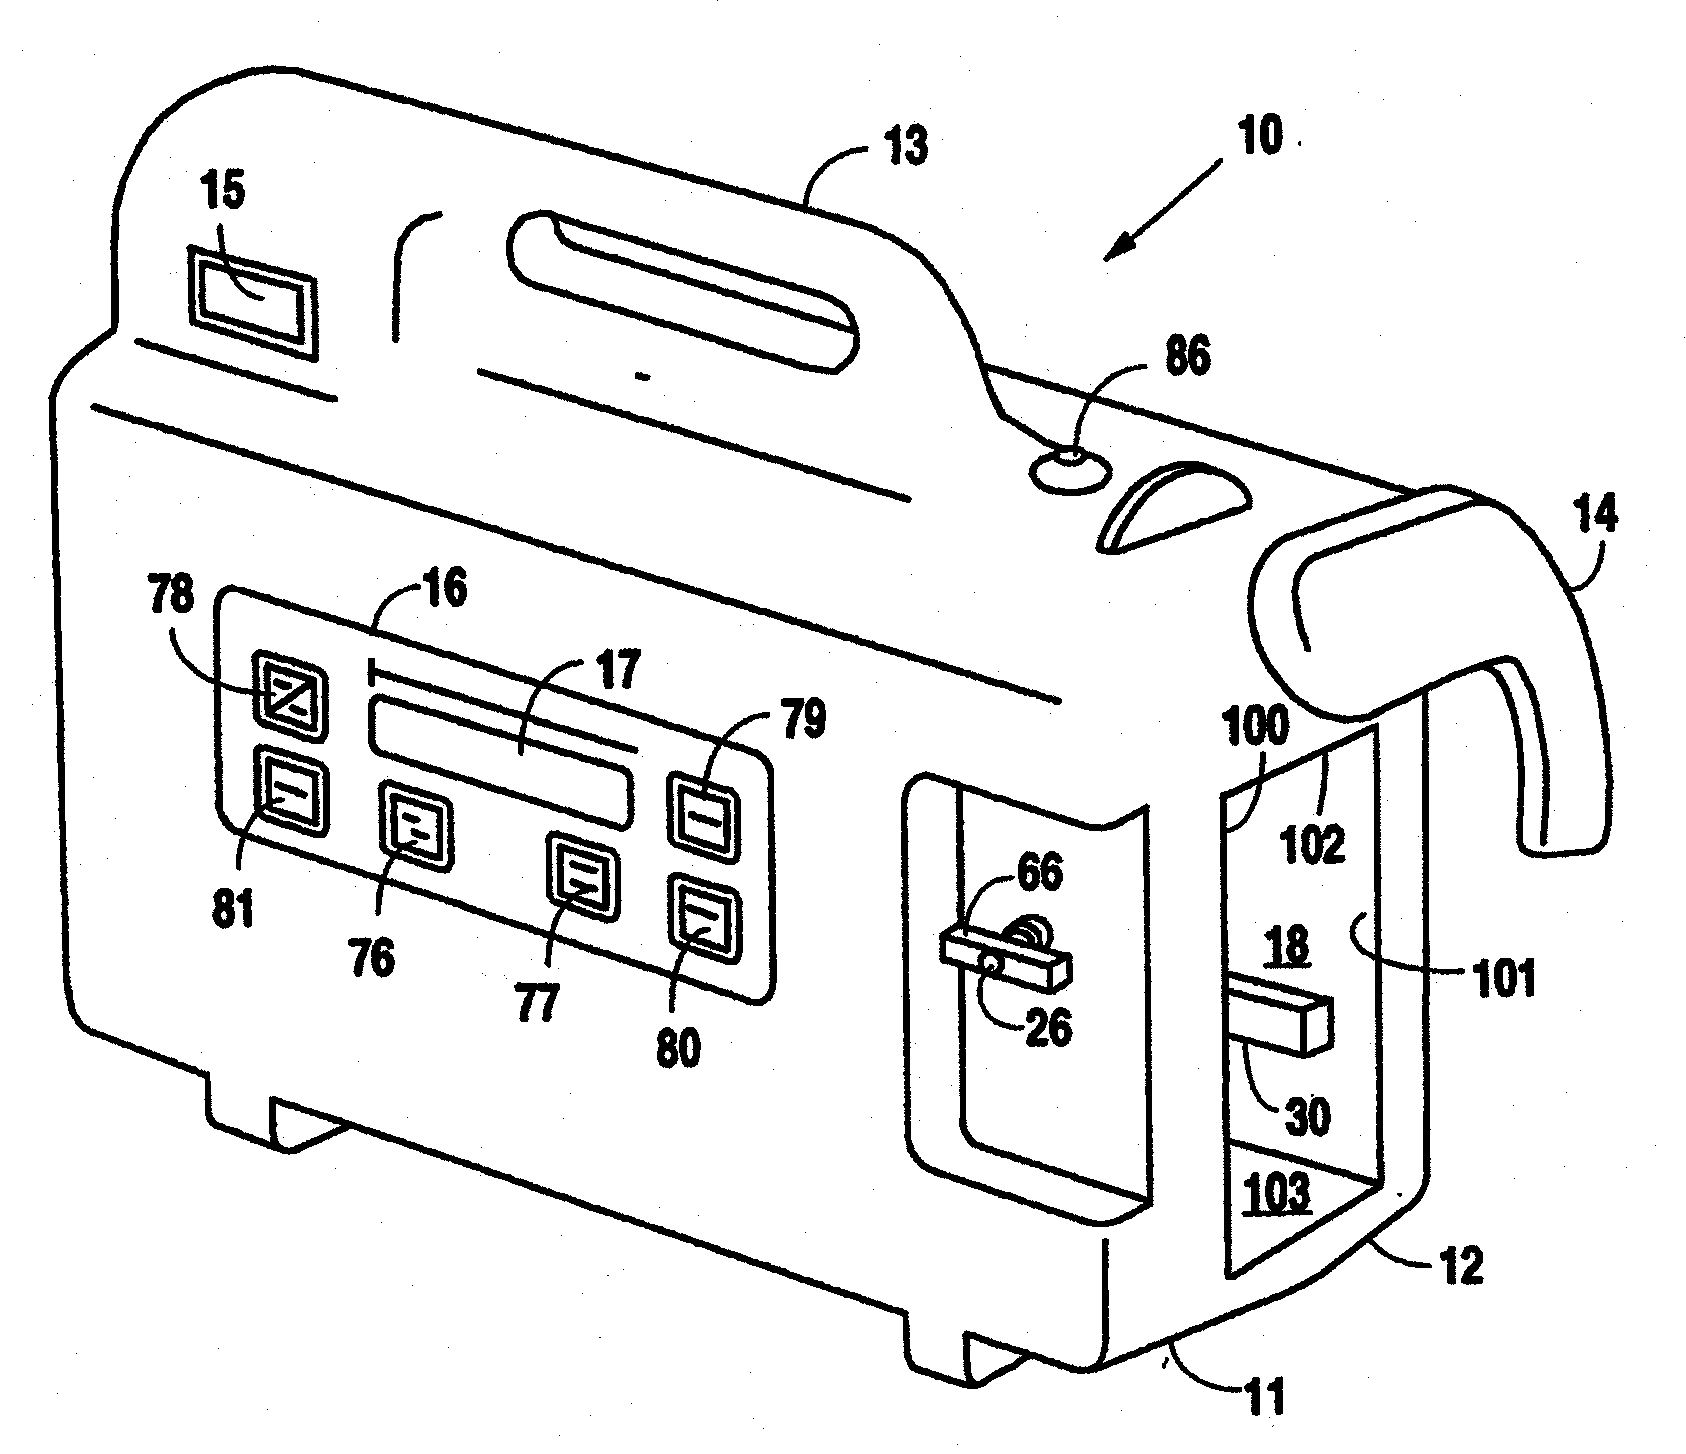 Reduced pressure treatment system having a dual porosity pad